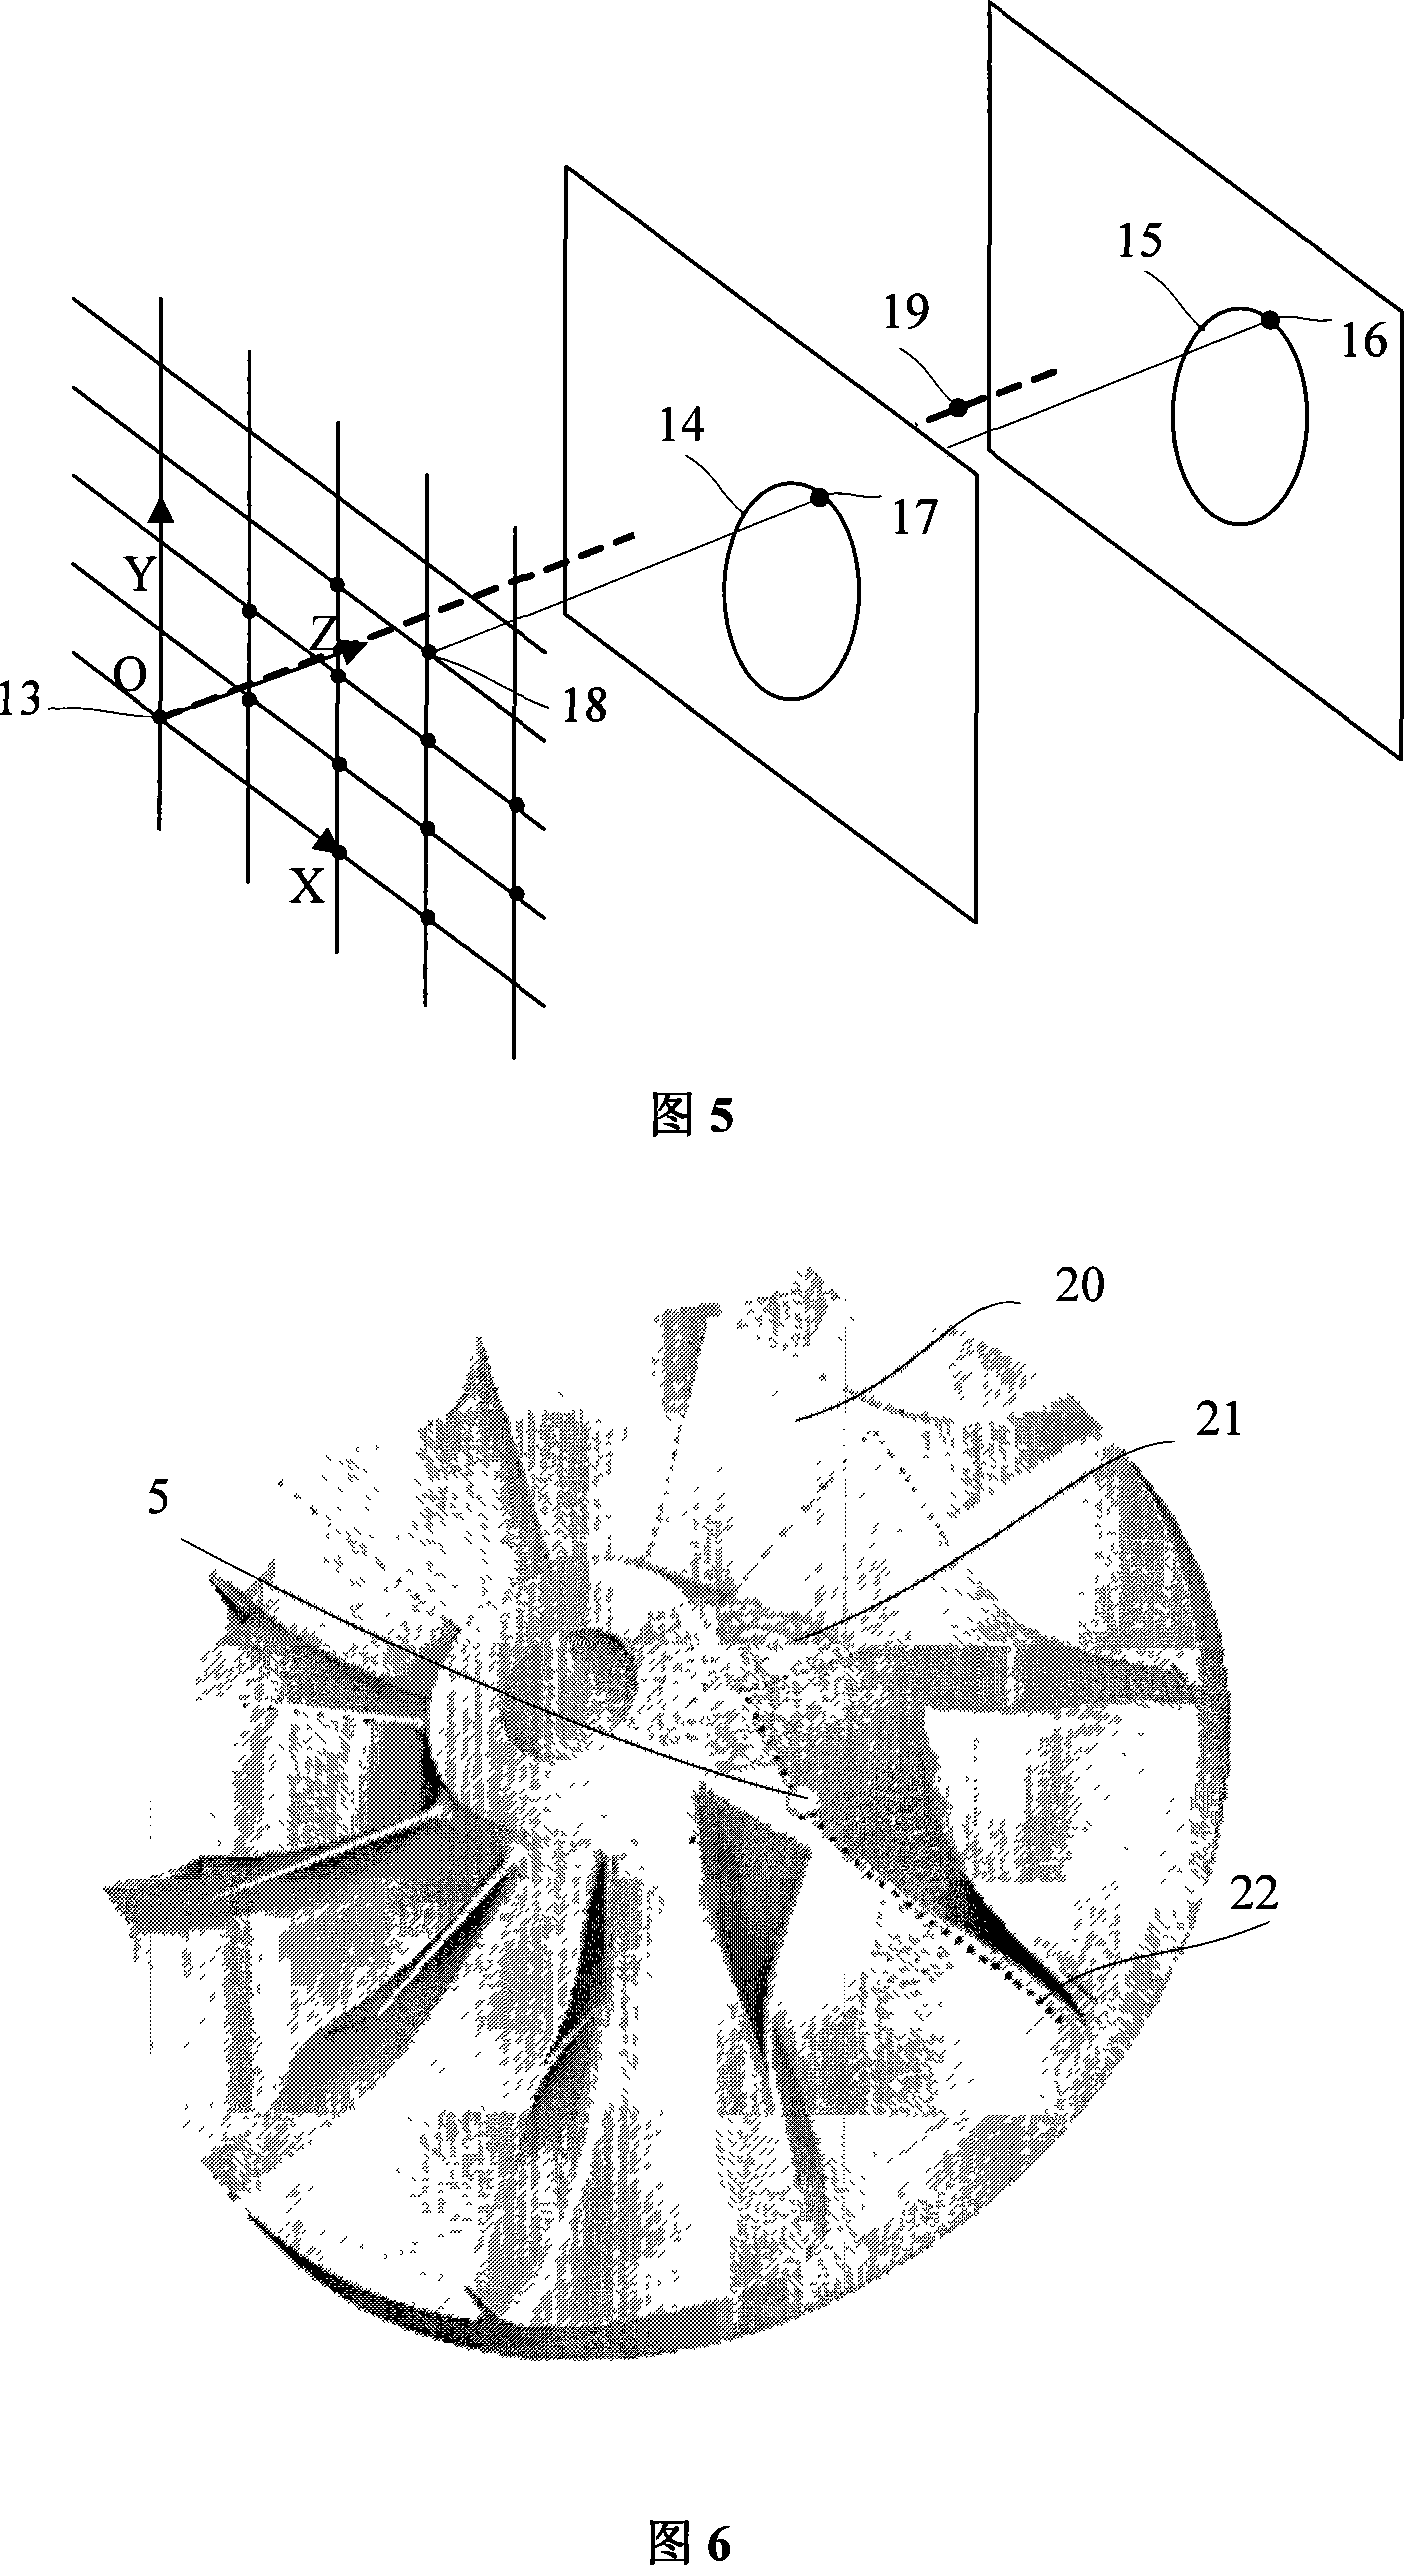 Method for planning smooth and non-interference tool route of 5-axis numerical control machining